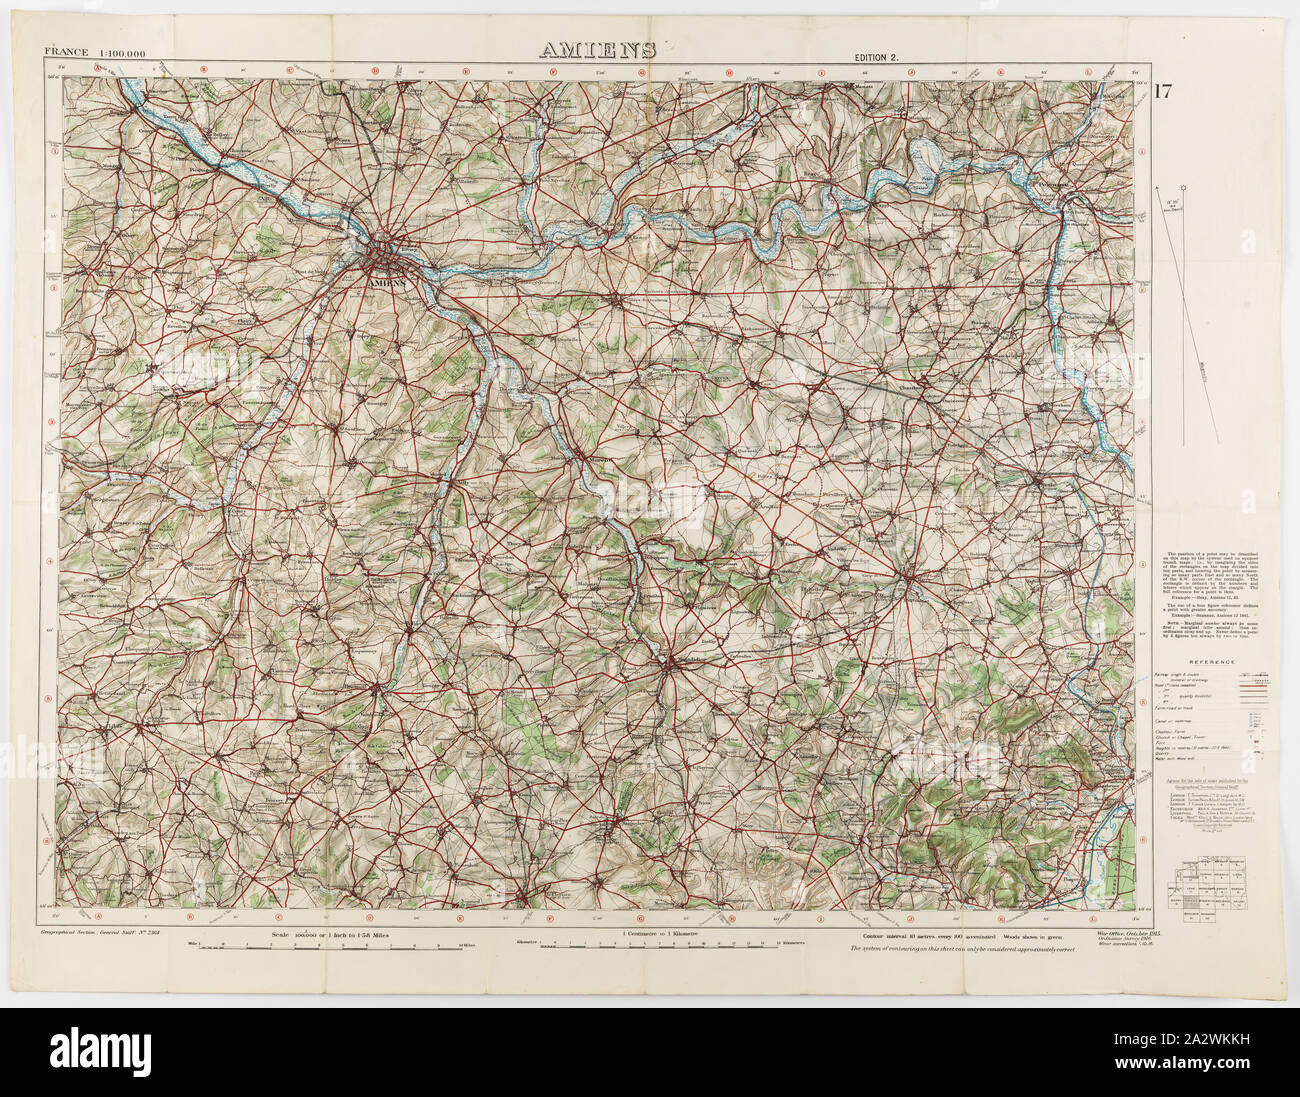 Ordnance Survey Map France Map - Military, France, Amiens 17, Scale 1:100,000, Edition 2, World War I,  1 Oct 1916, World War I Military Map Of Amiens, Sheet 17, France, Scale  1:100,000, Edition 2, Published By